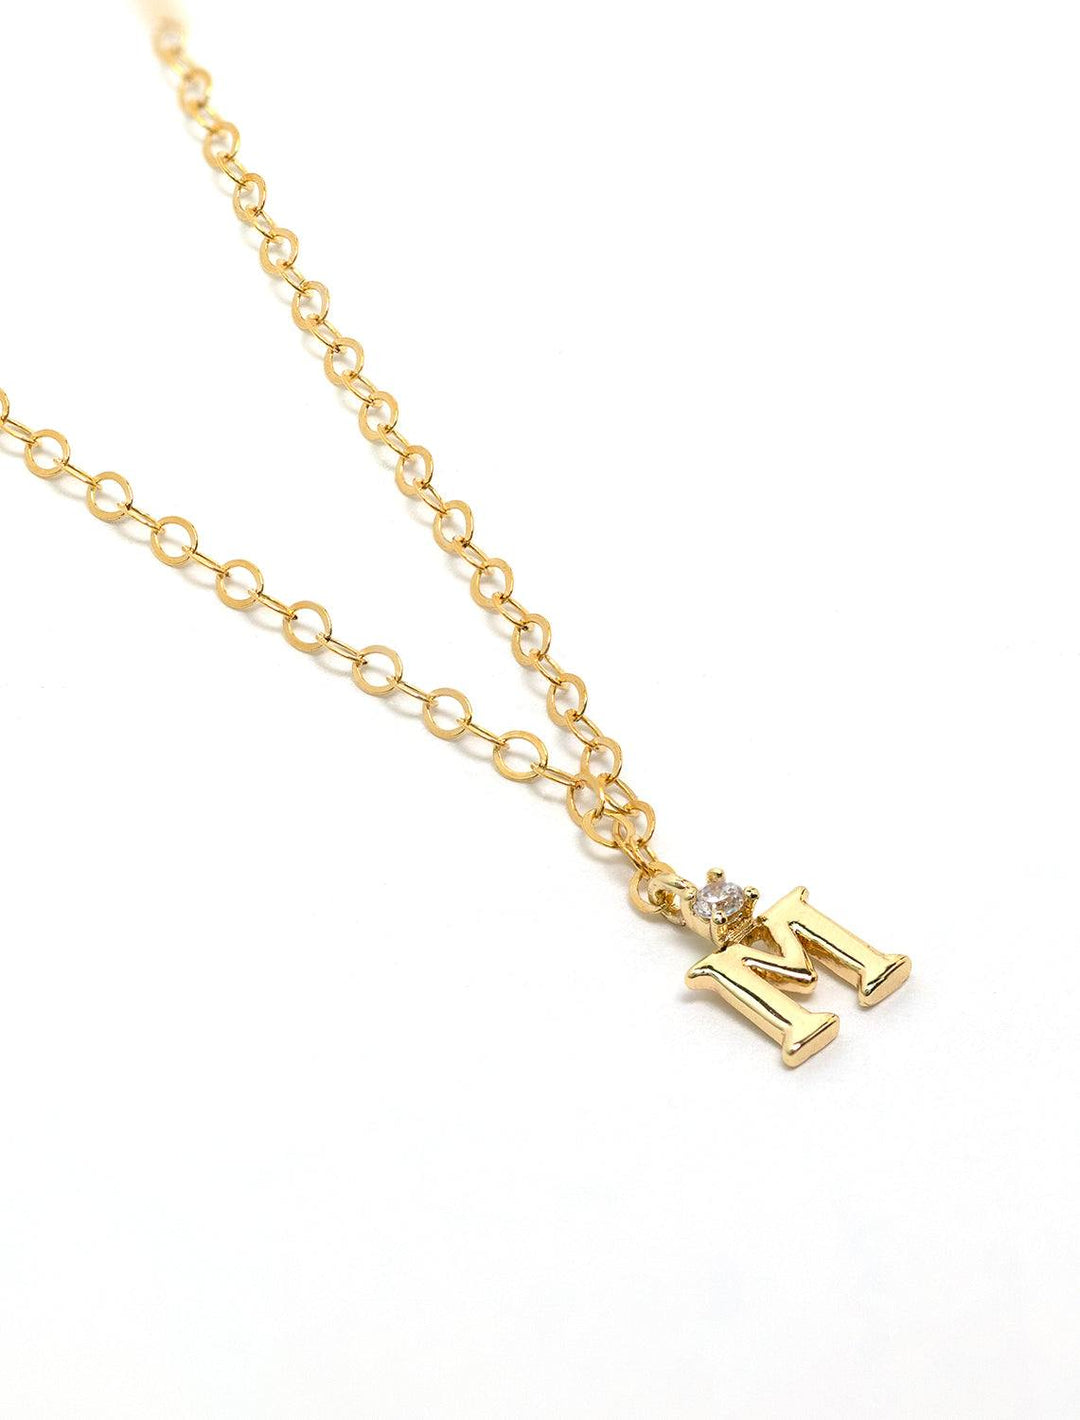 Marit Rae initial and cz necklace in gold | M - Twigs